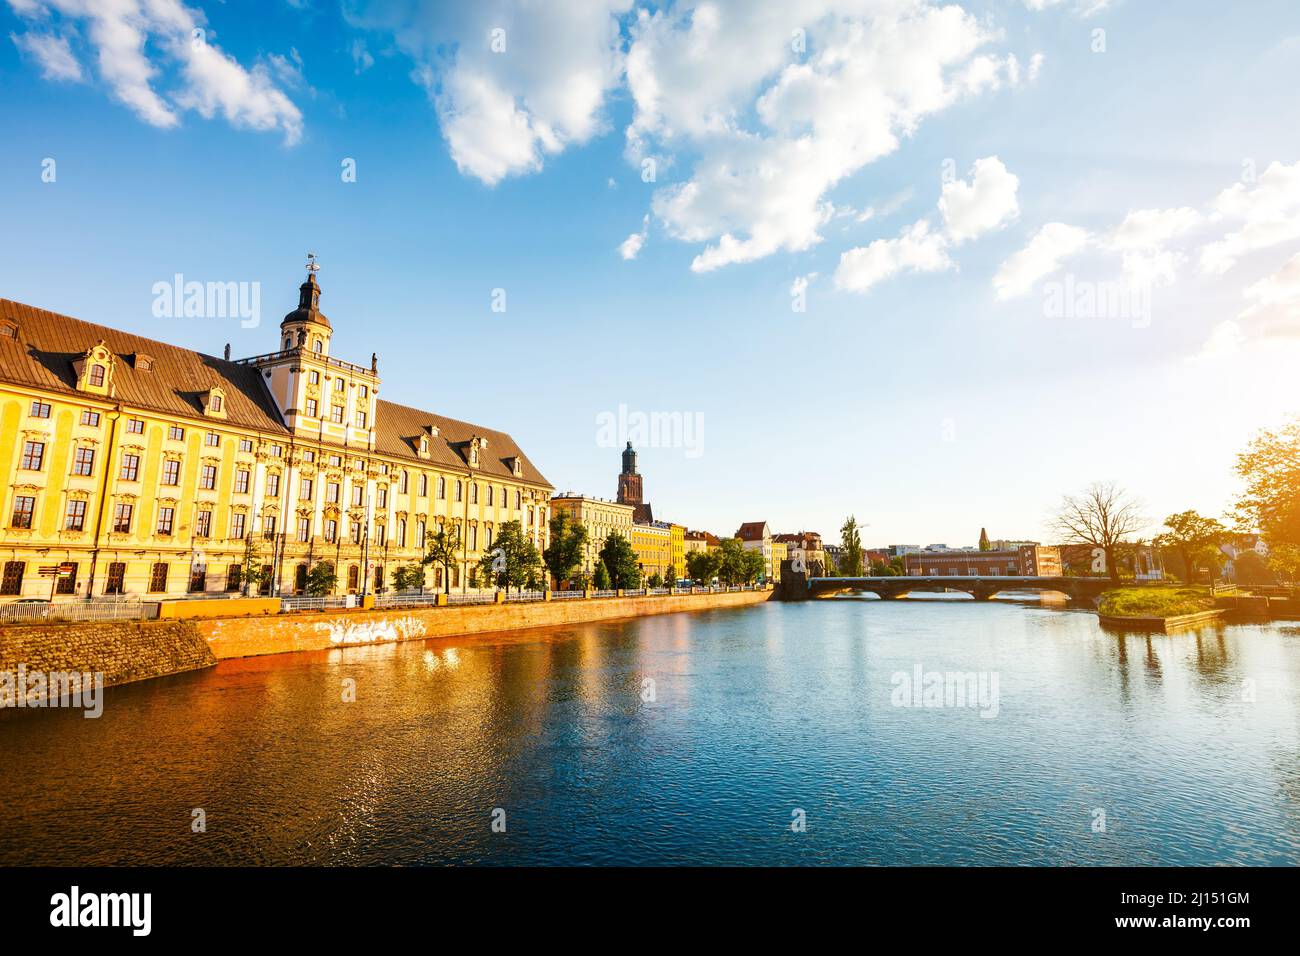 Fantastic view of the ancient city Wroclaw. Picturesque scene. Location: famous place Odra river, Poland, Europe. Historical capital of Silesia. Beaut Stock Photo